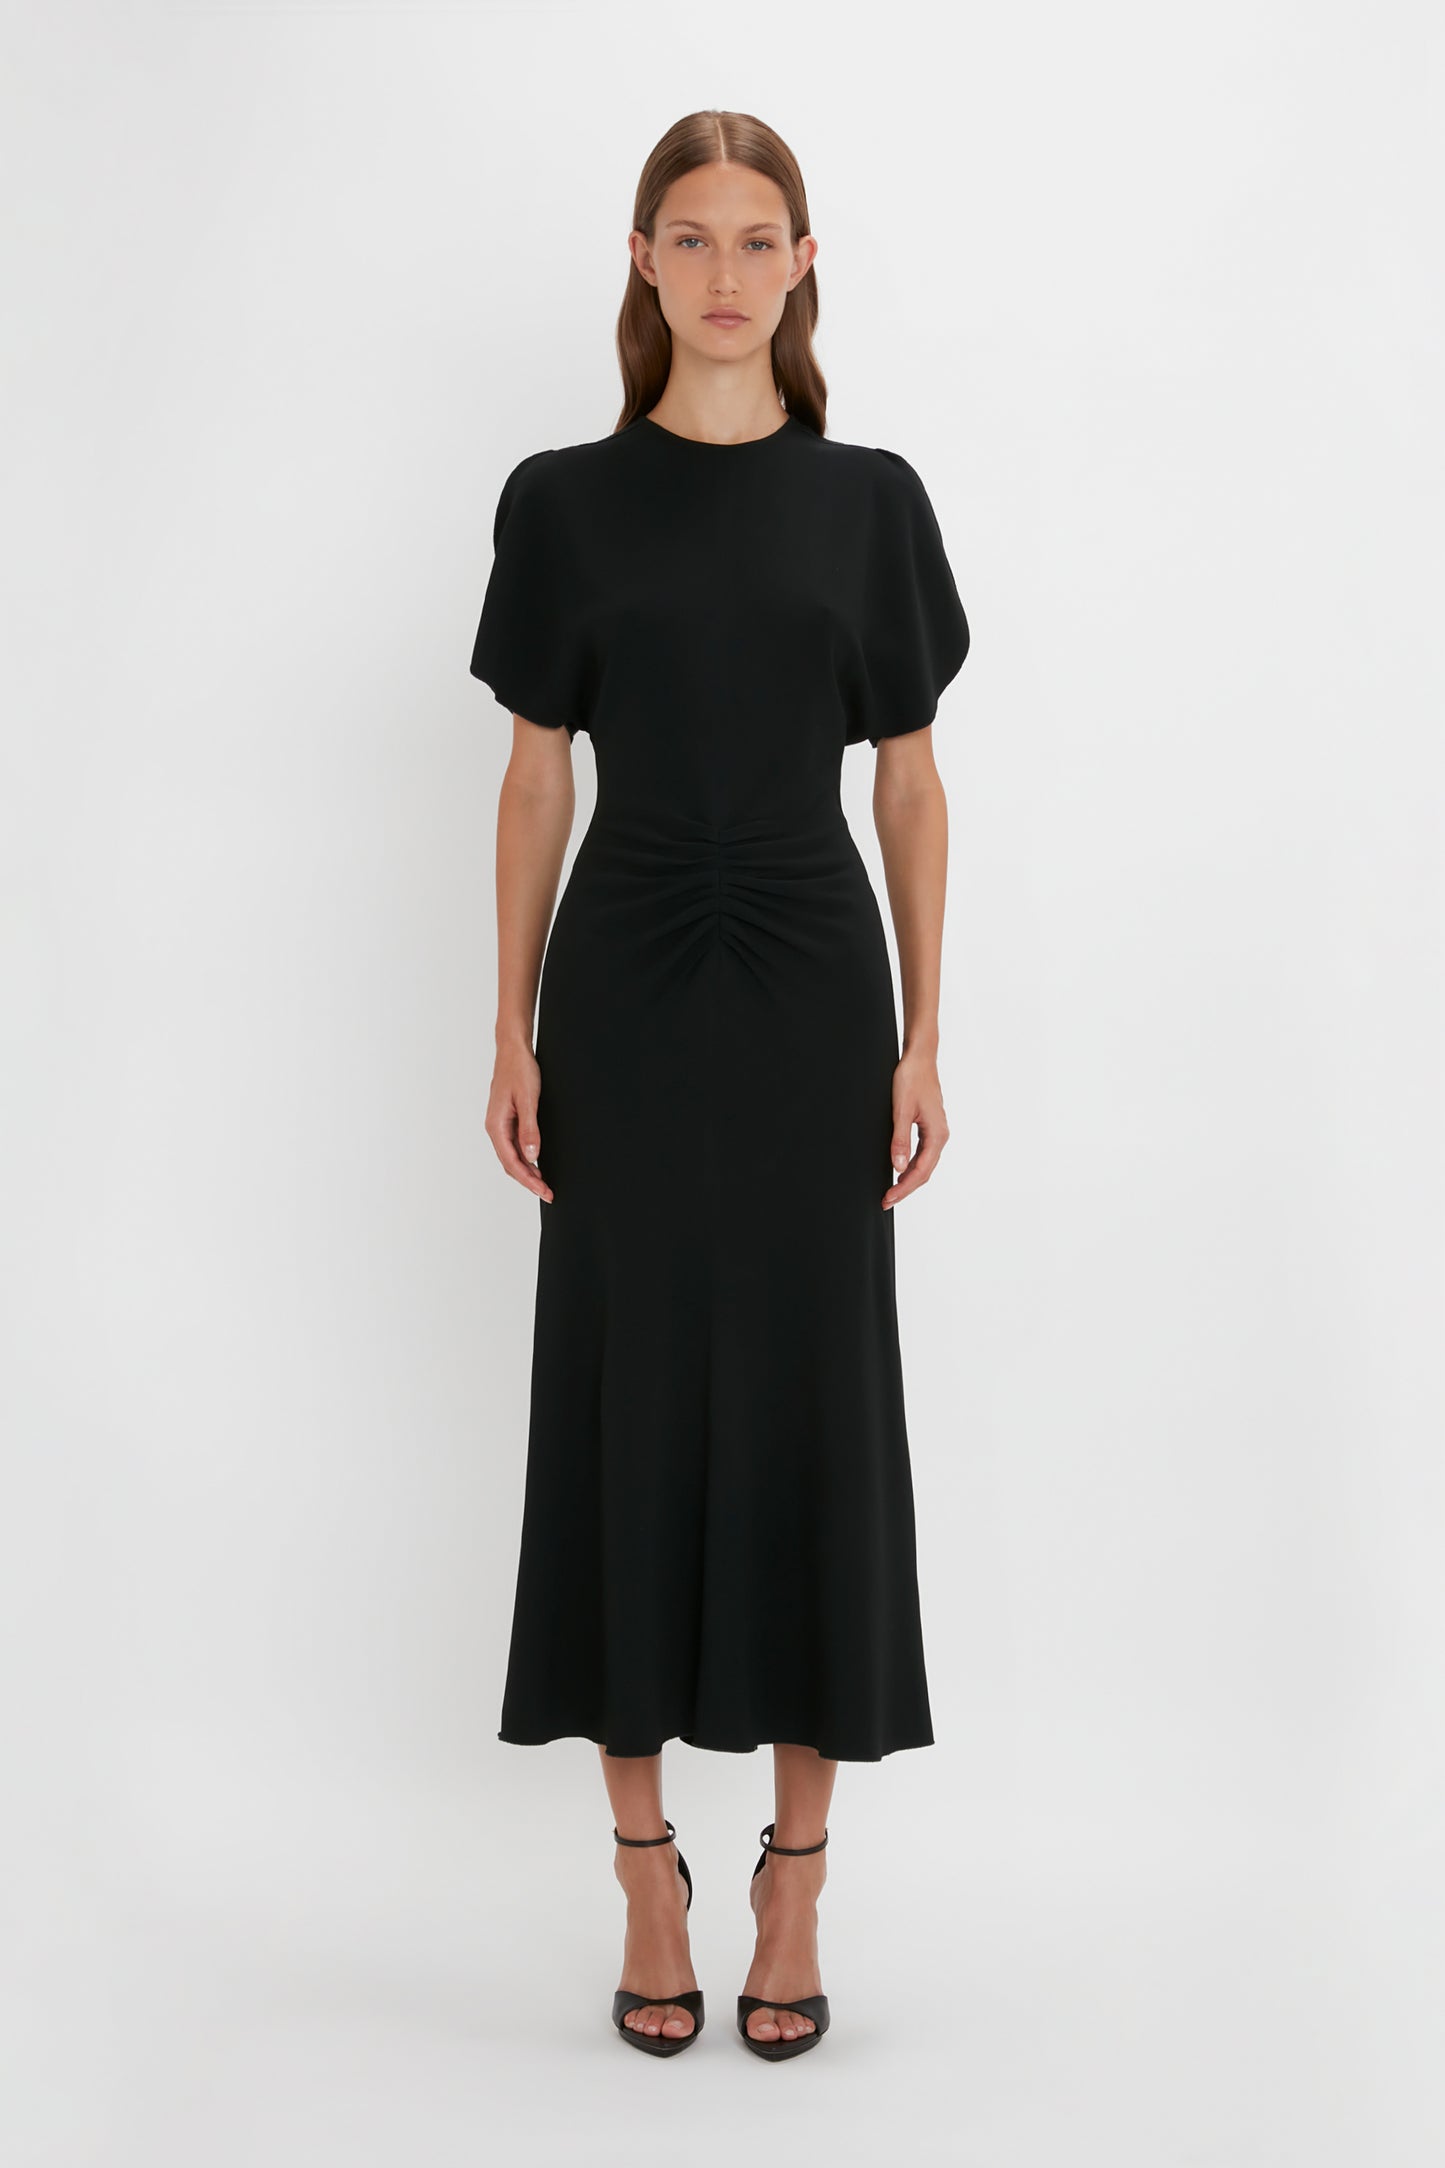 A woman in a black Gathered Waist Midi Dress by Victoria Beckham with short sleeves and a twisted detail at the waist, standing against a white background.